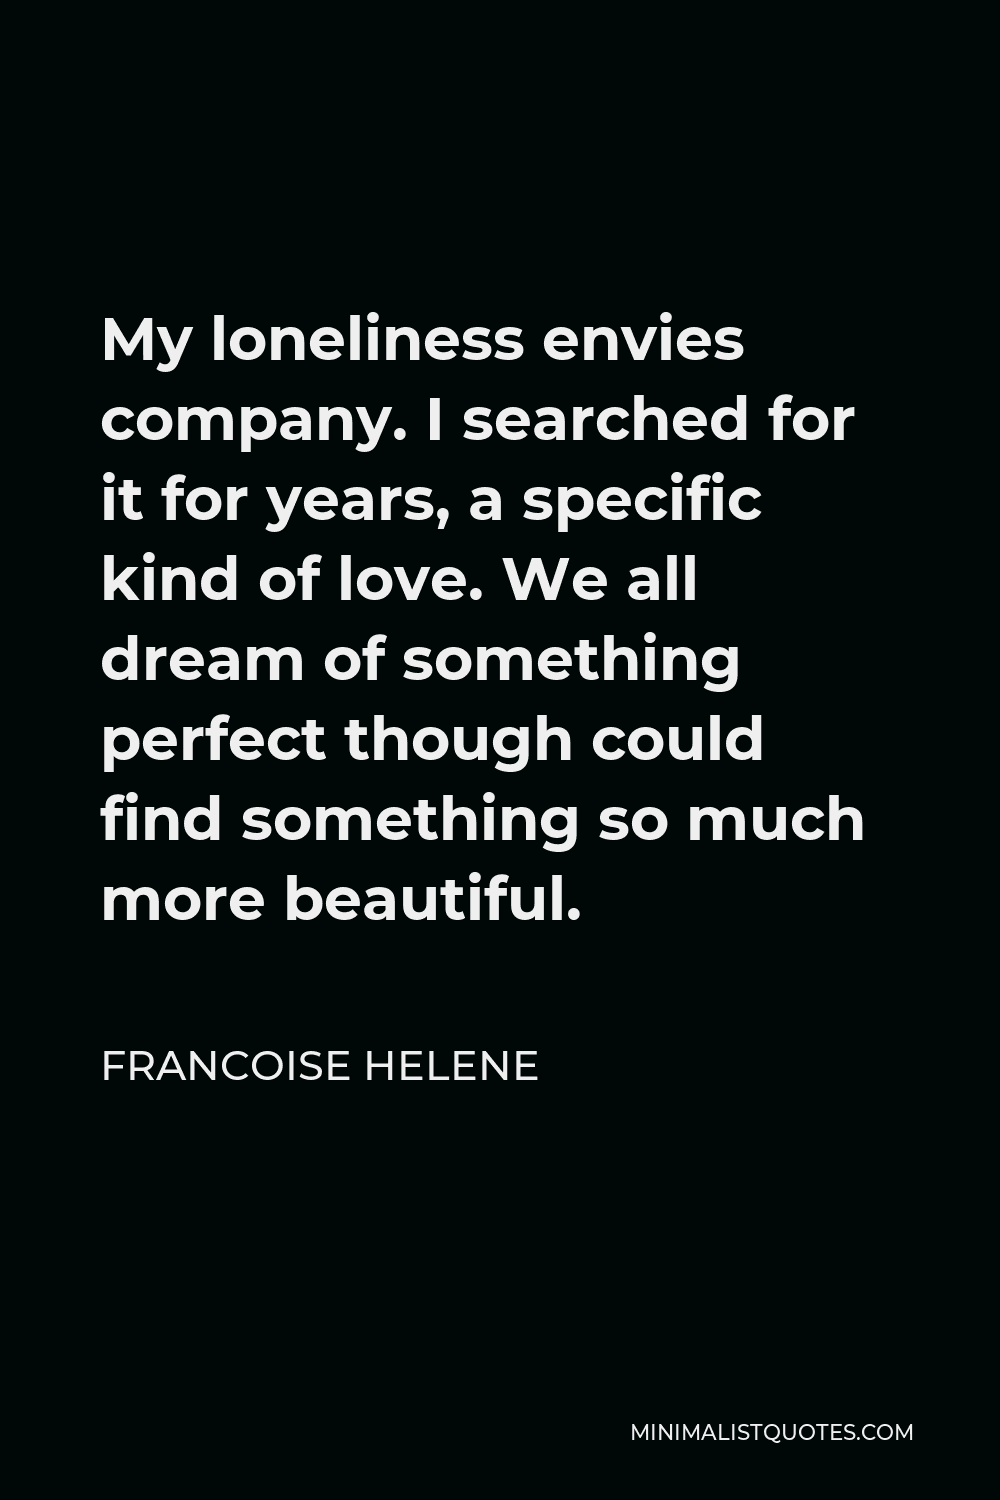 Francoise Helene Quote - My loneliness envies company. I searched for it for years, a specific kind of love. We all dream of something perfect though could find something so much more beautiful.